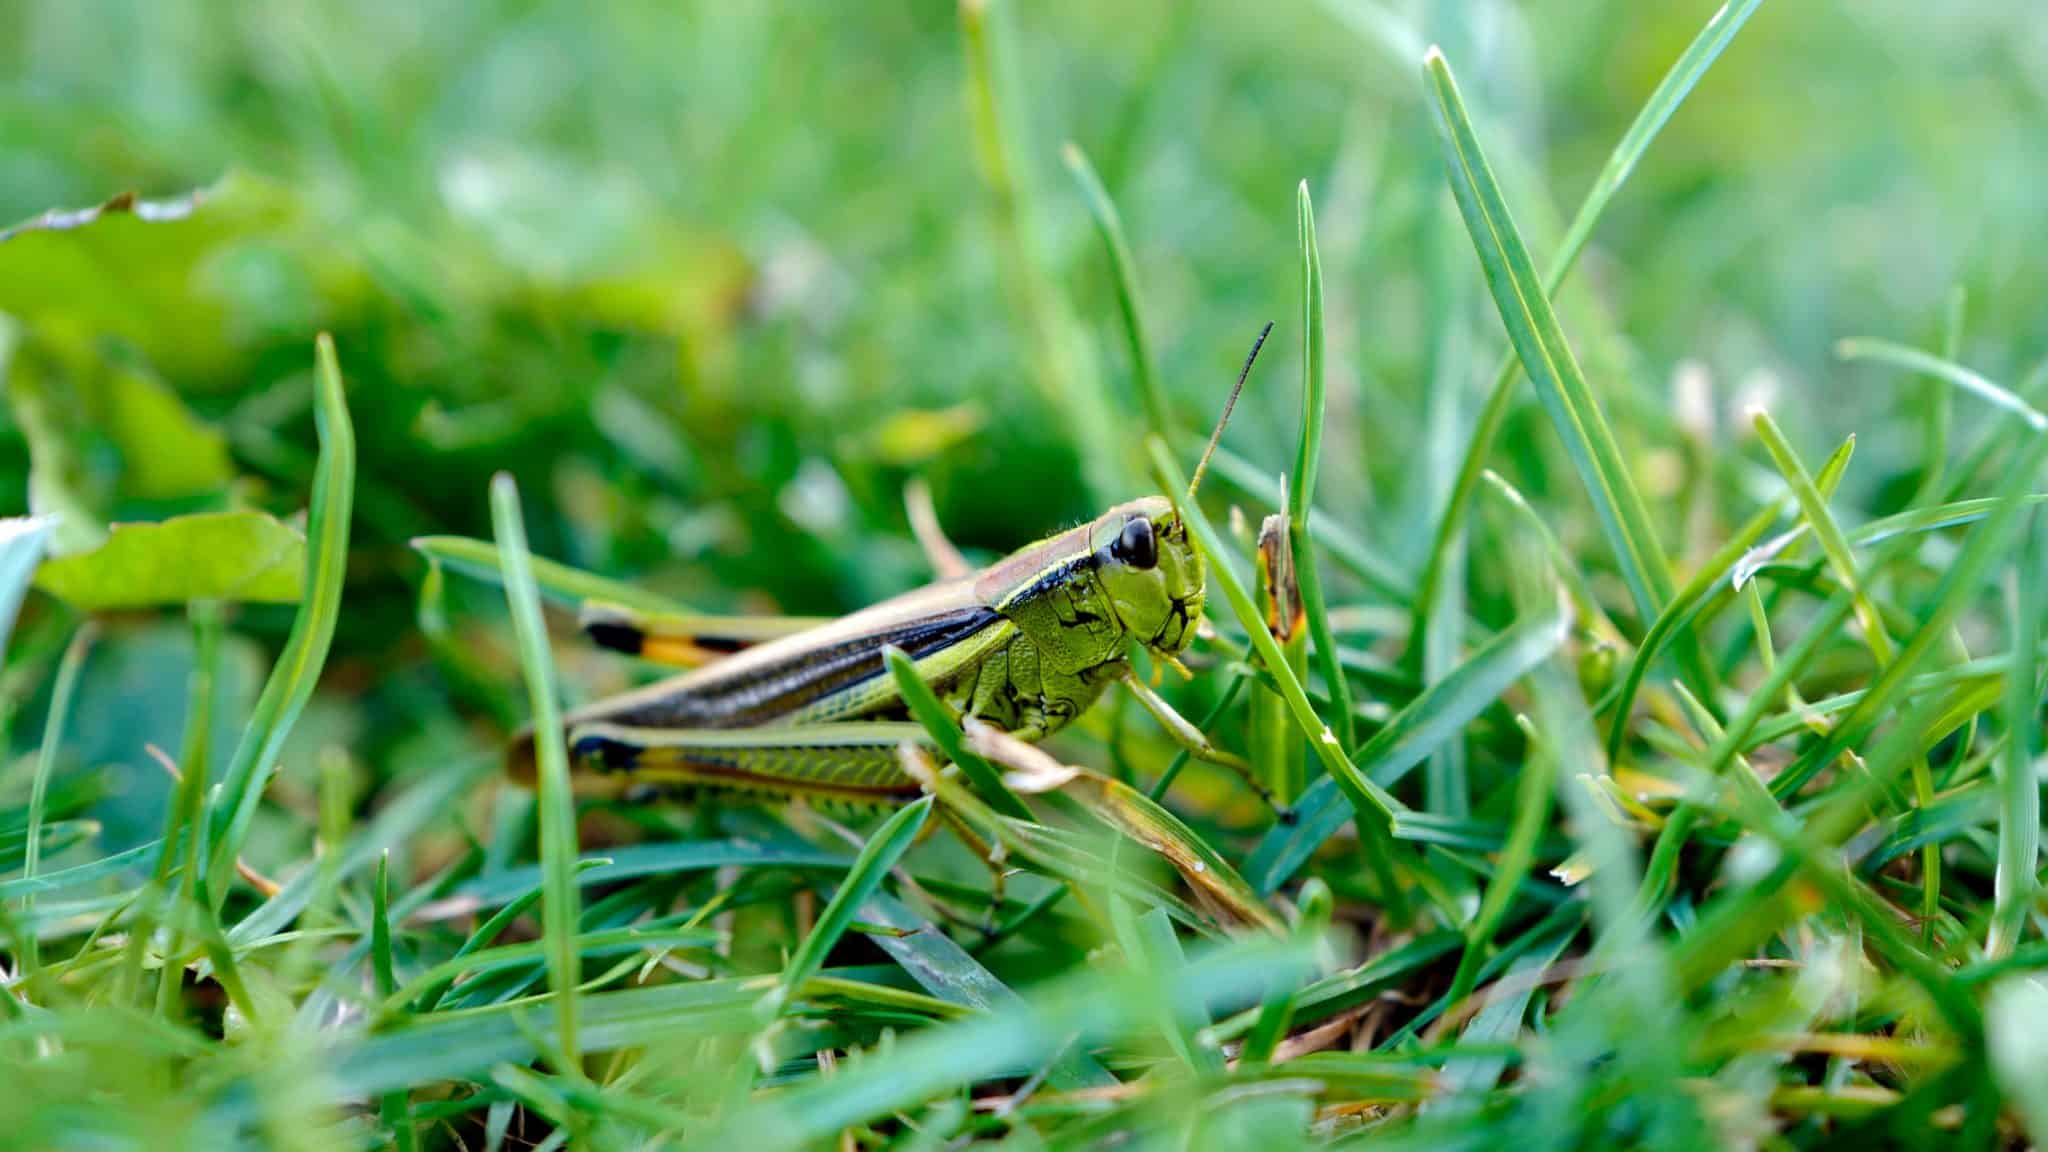 “Plagues” of Grasshoppers Hit Western US